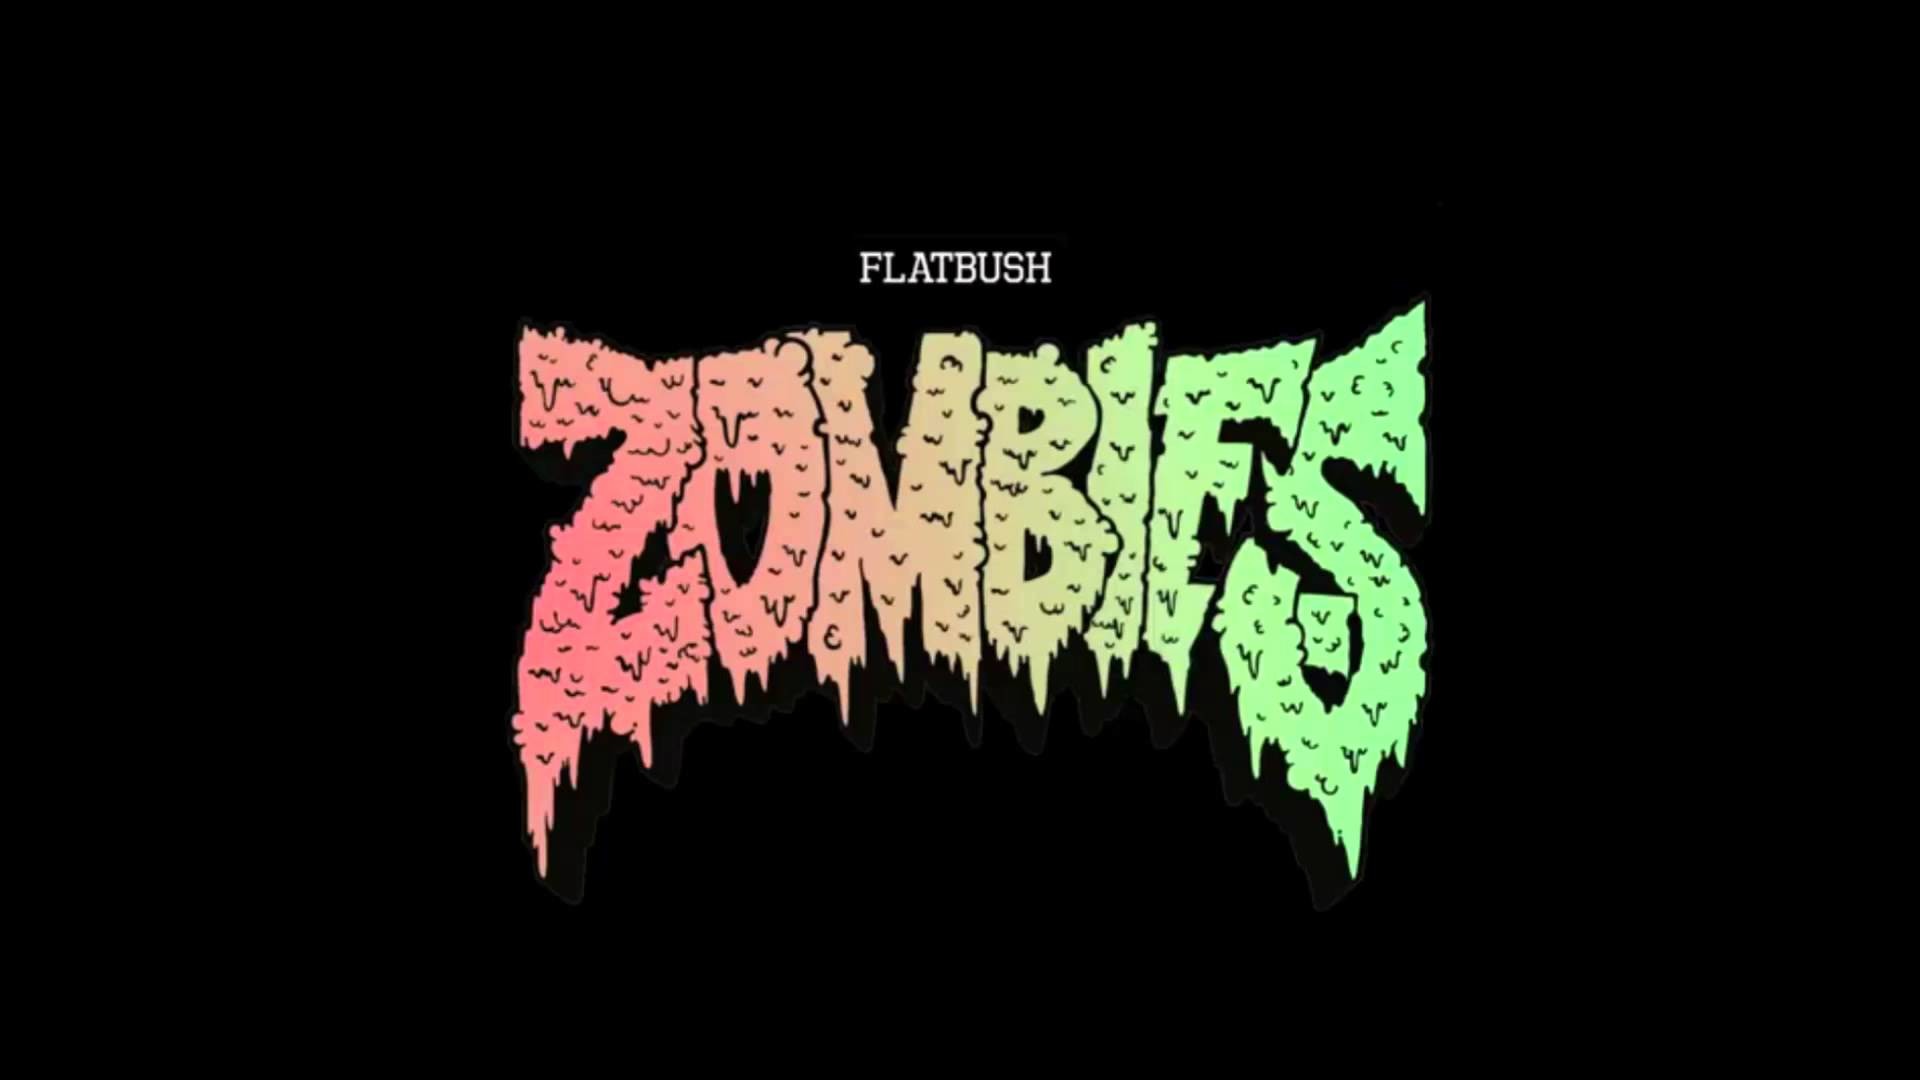 1920x1080 FLATBUSH ZOMBIES WALLPAPERS FREE Wallpapers & Background images .